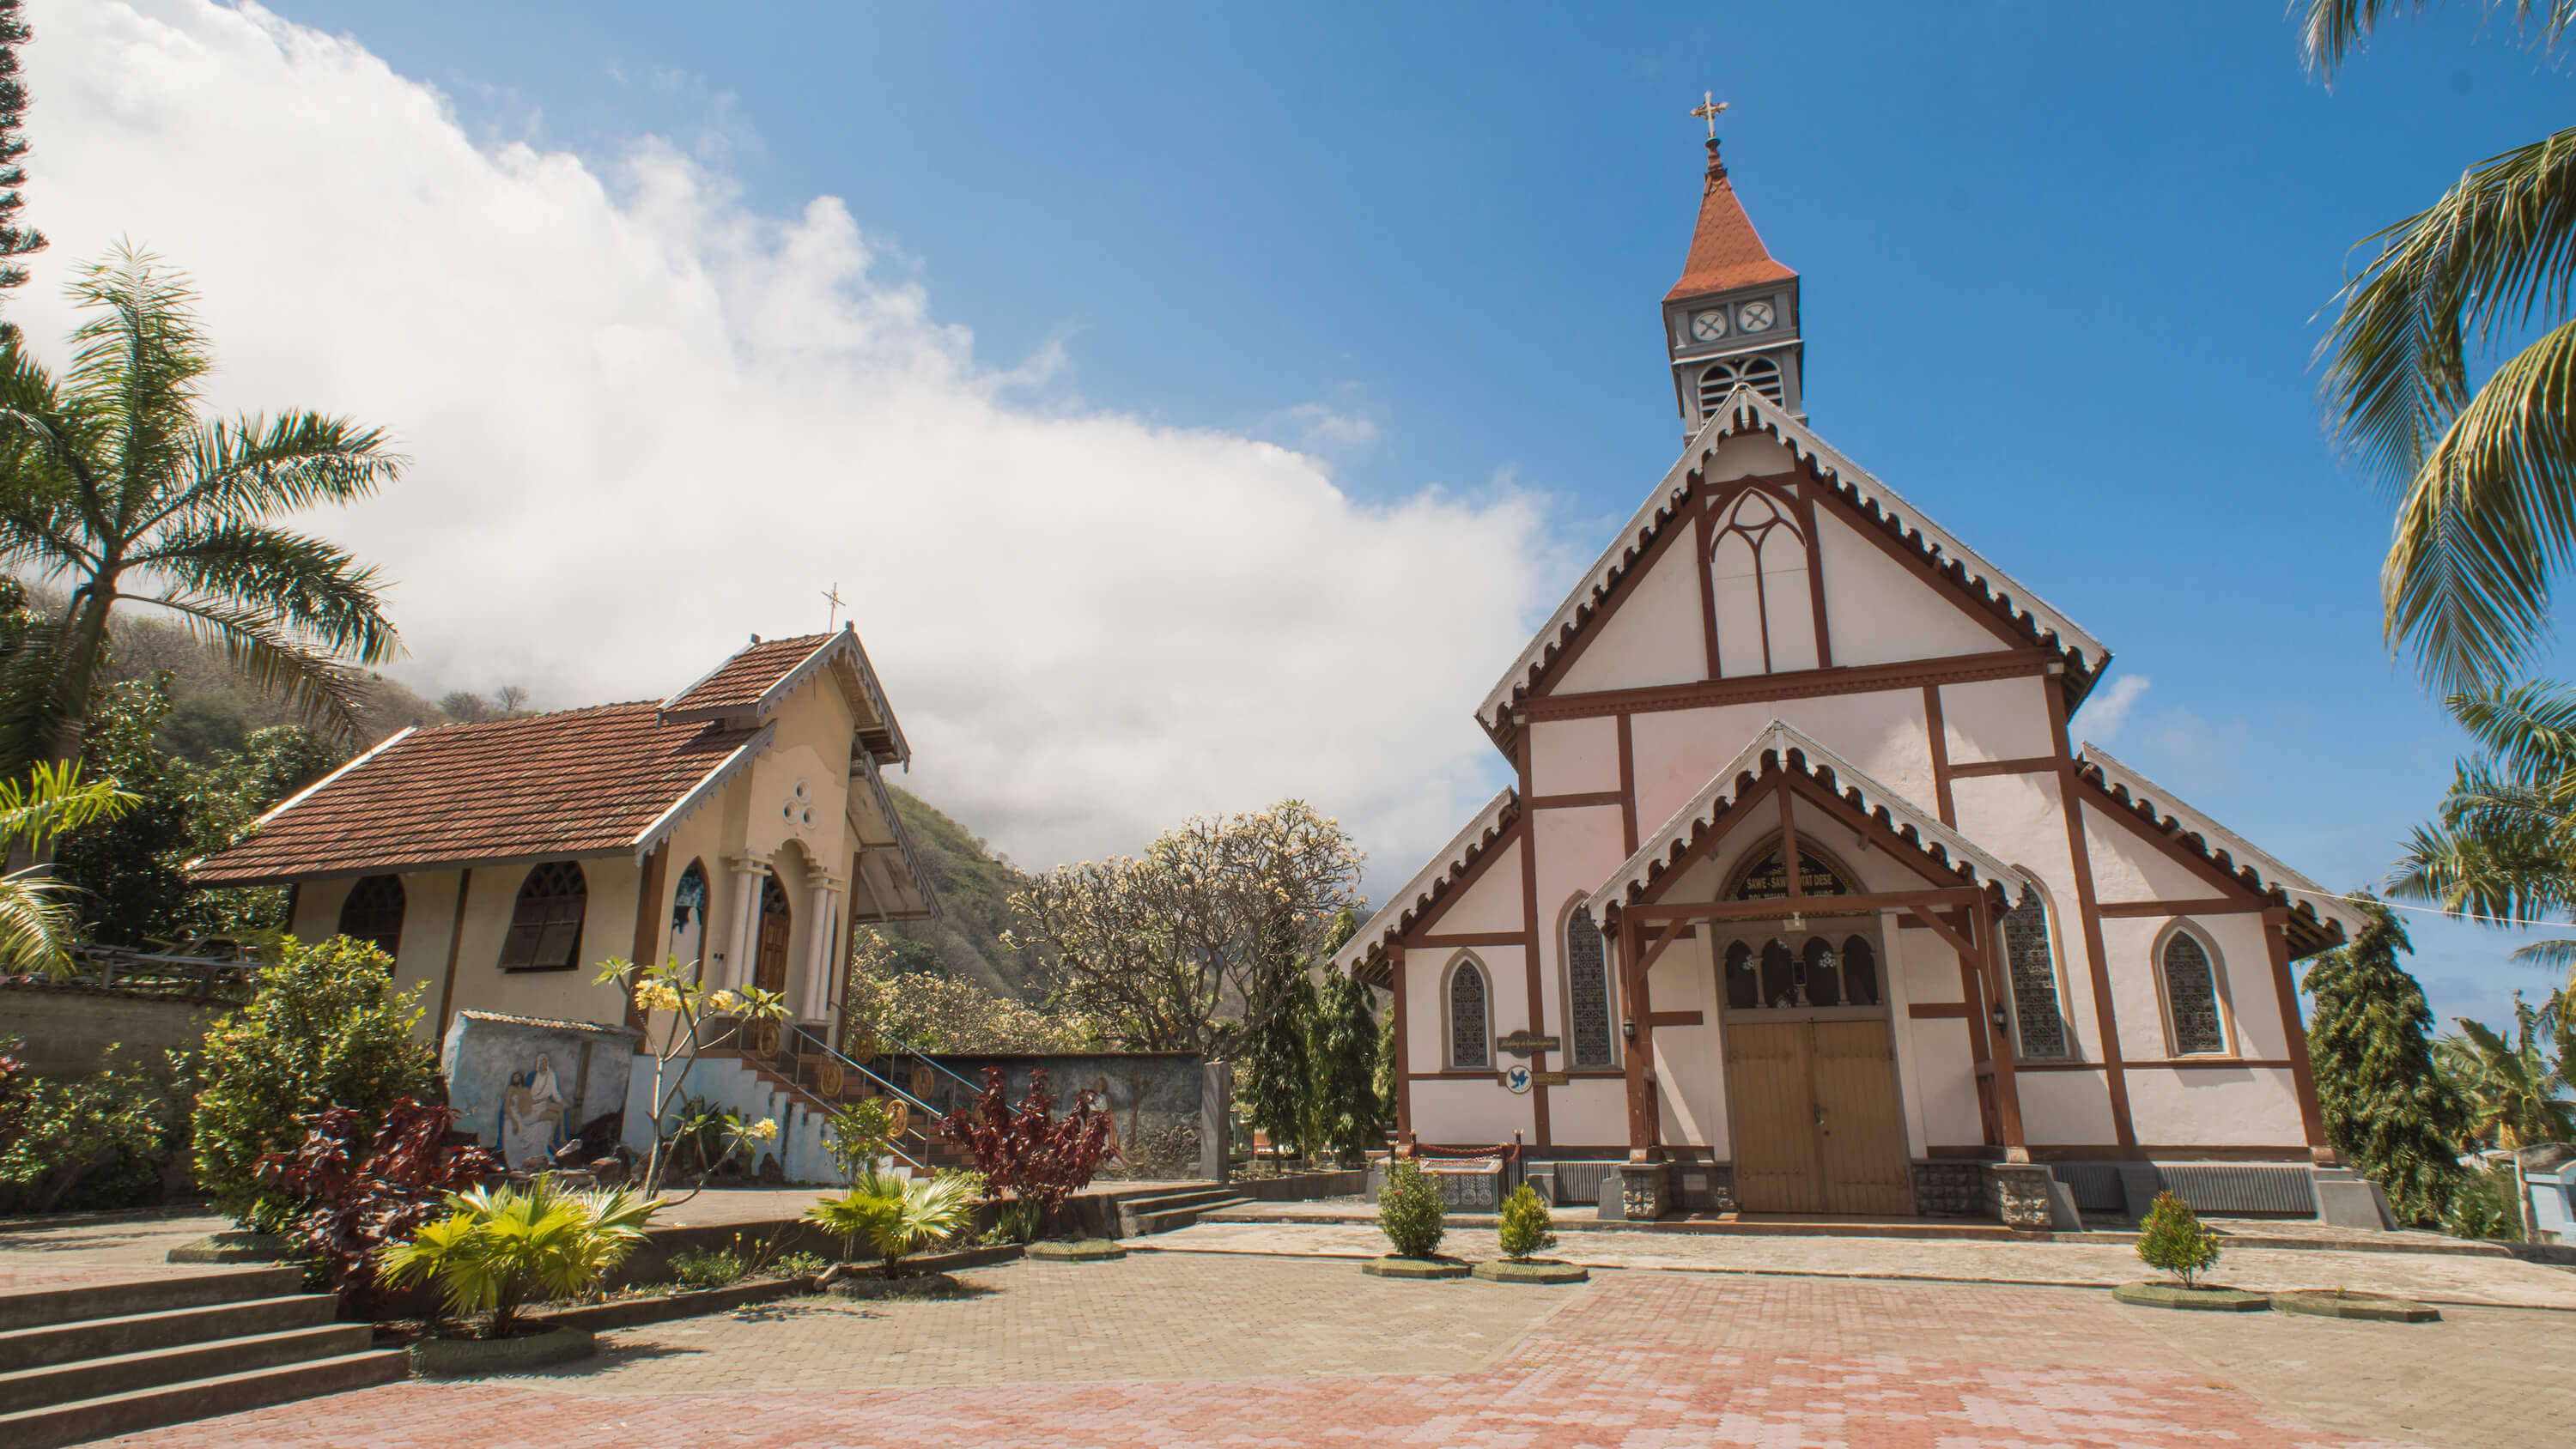 If you visit Sikka, do explore its rich history as a Roman Catholic kingdom. Some of its sites bear ikat motifs, such as Santo Ignatius de Loyola Church, the oldest intact church in Flores. Photo by Andra Fembriarto